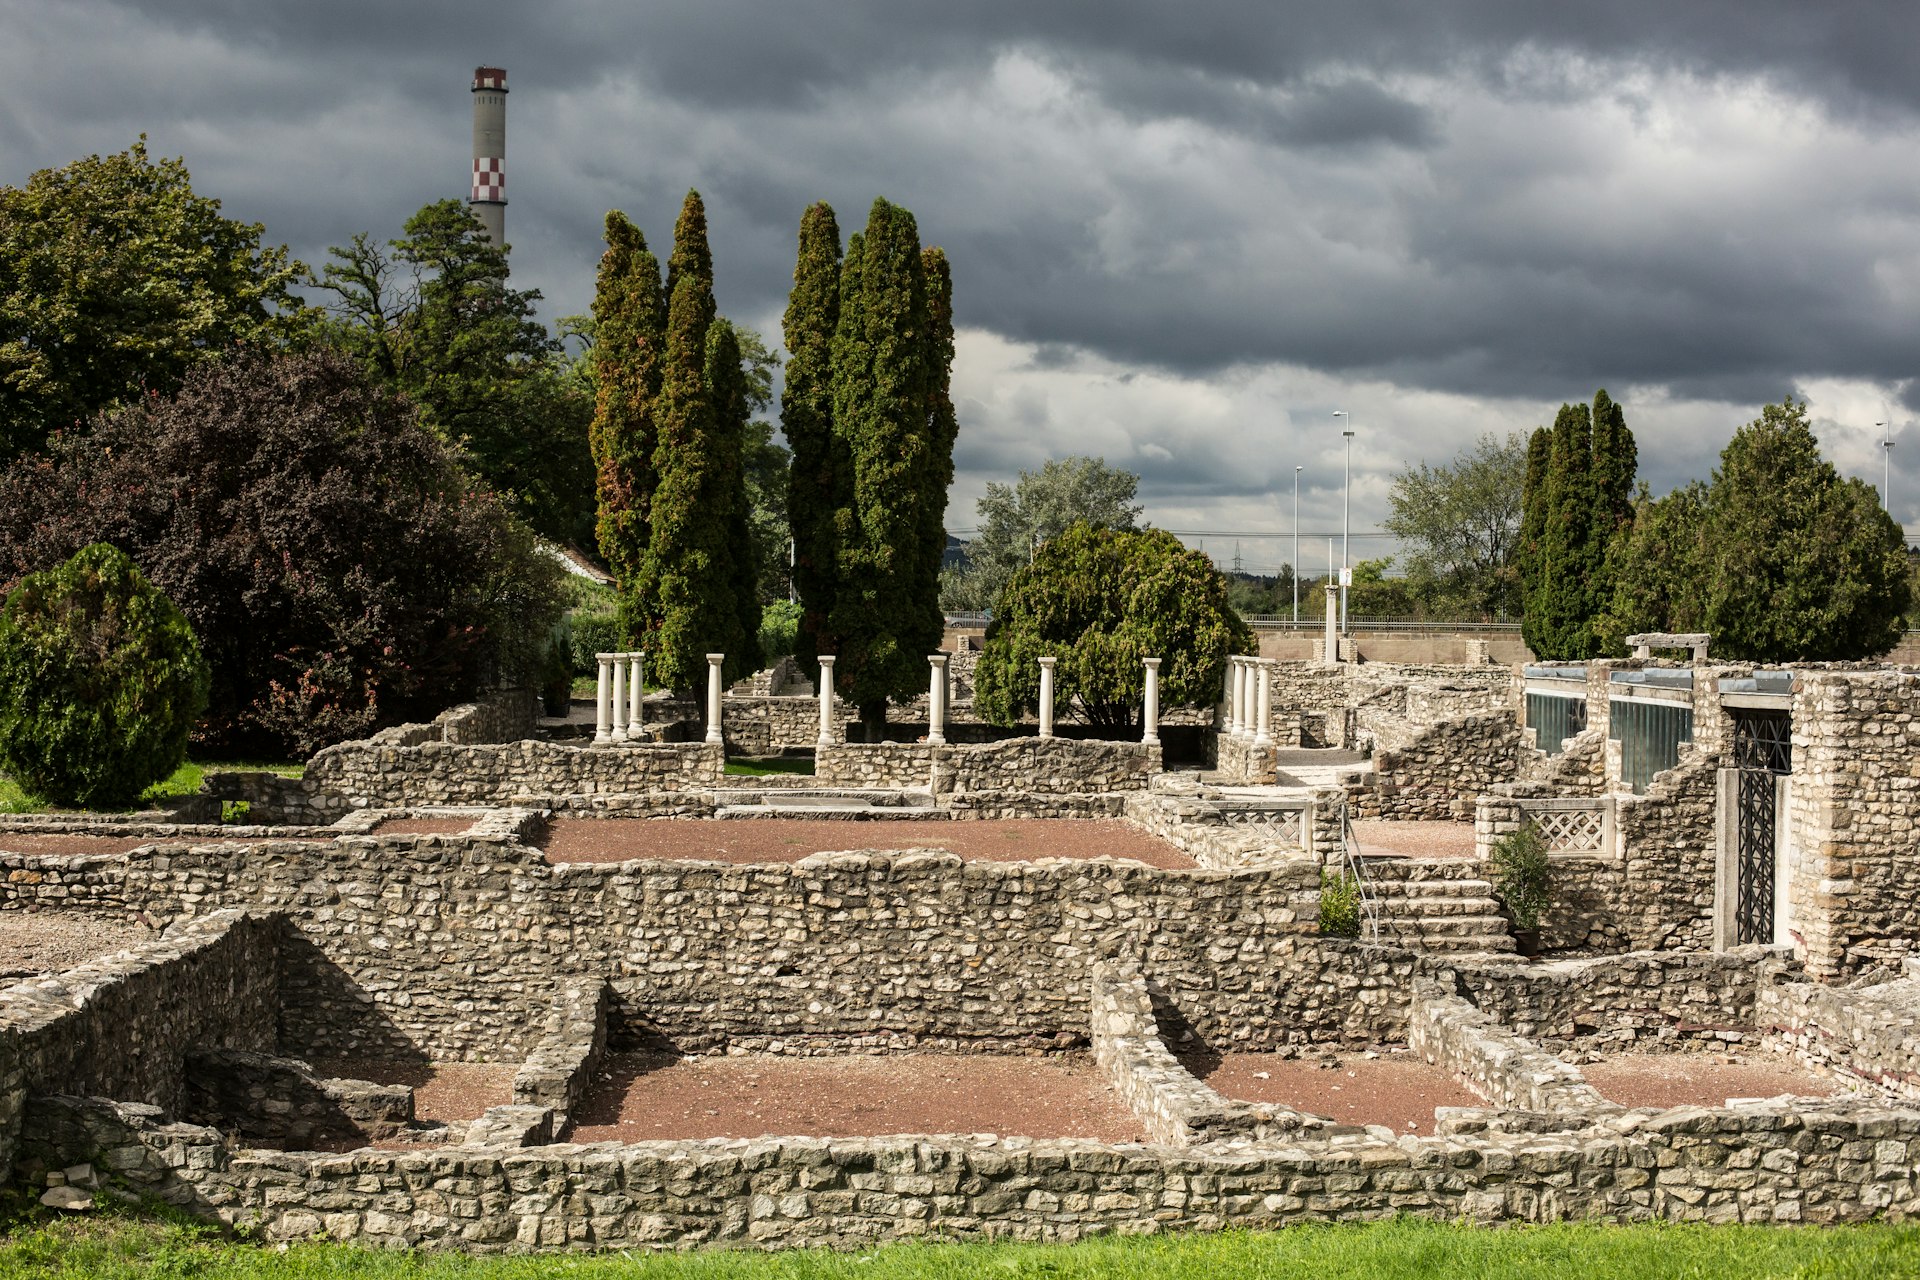 Ruins from the 1st century Roman town of Aquincum in Budapest, photographed under a stormy sky